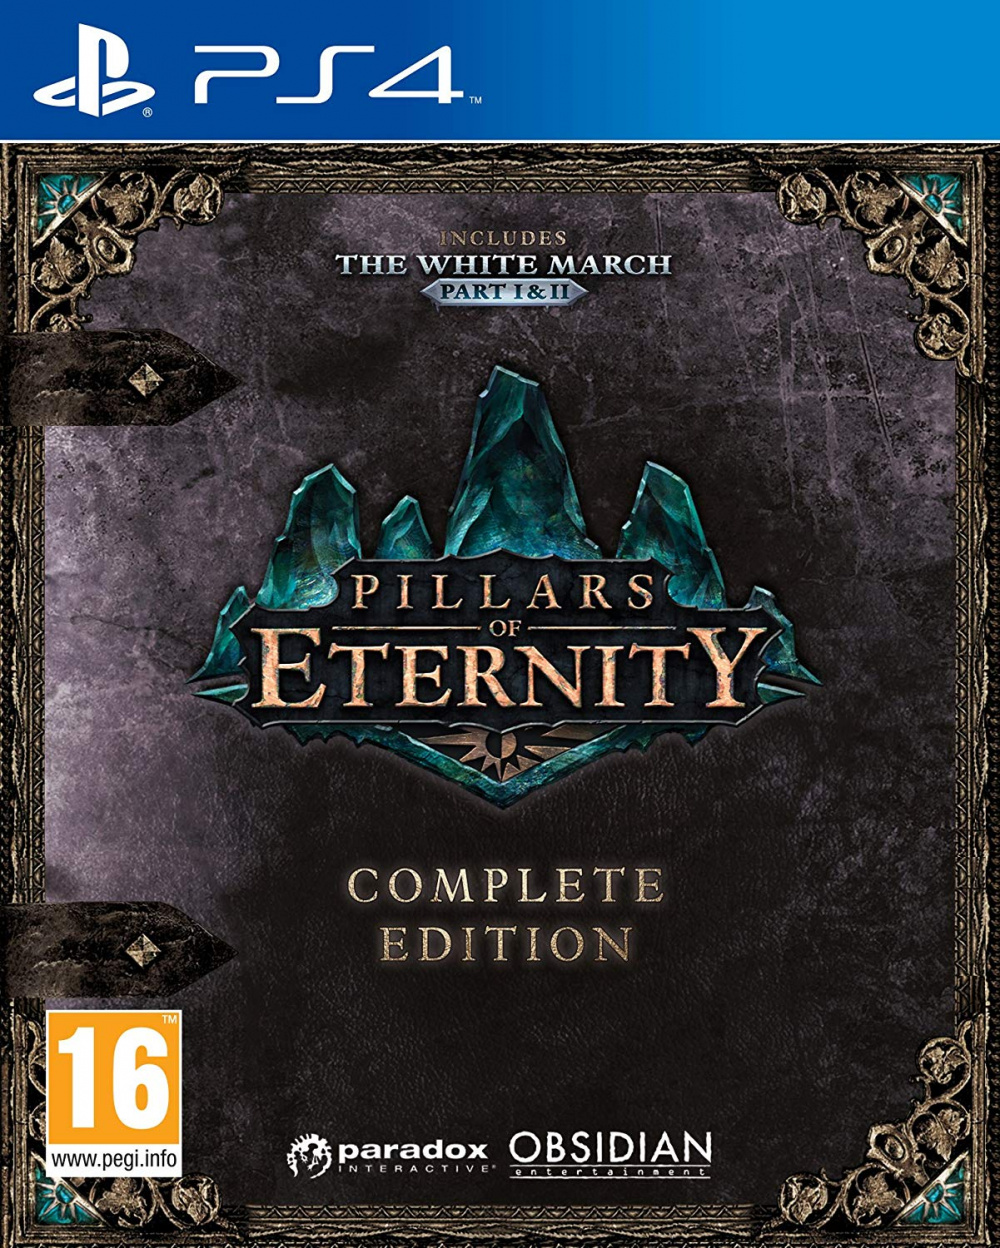 Pillars Of Eternity - Complete Edition [PS4] 5.05 / 6.72 / 7.02 [USA] (2017) [Русский] (v1.06)